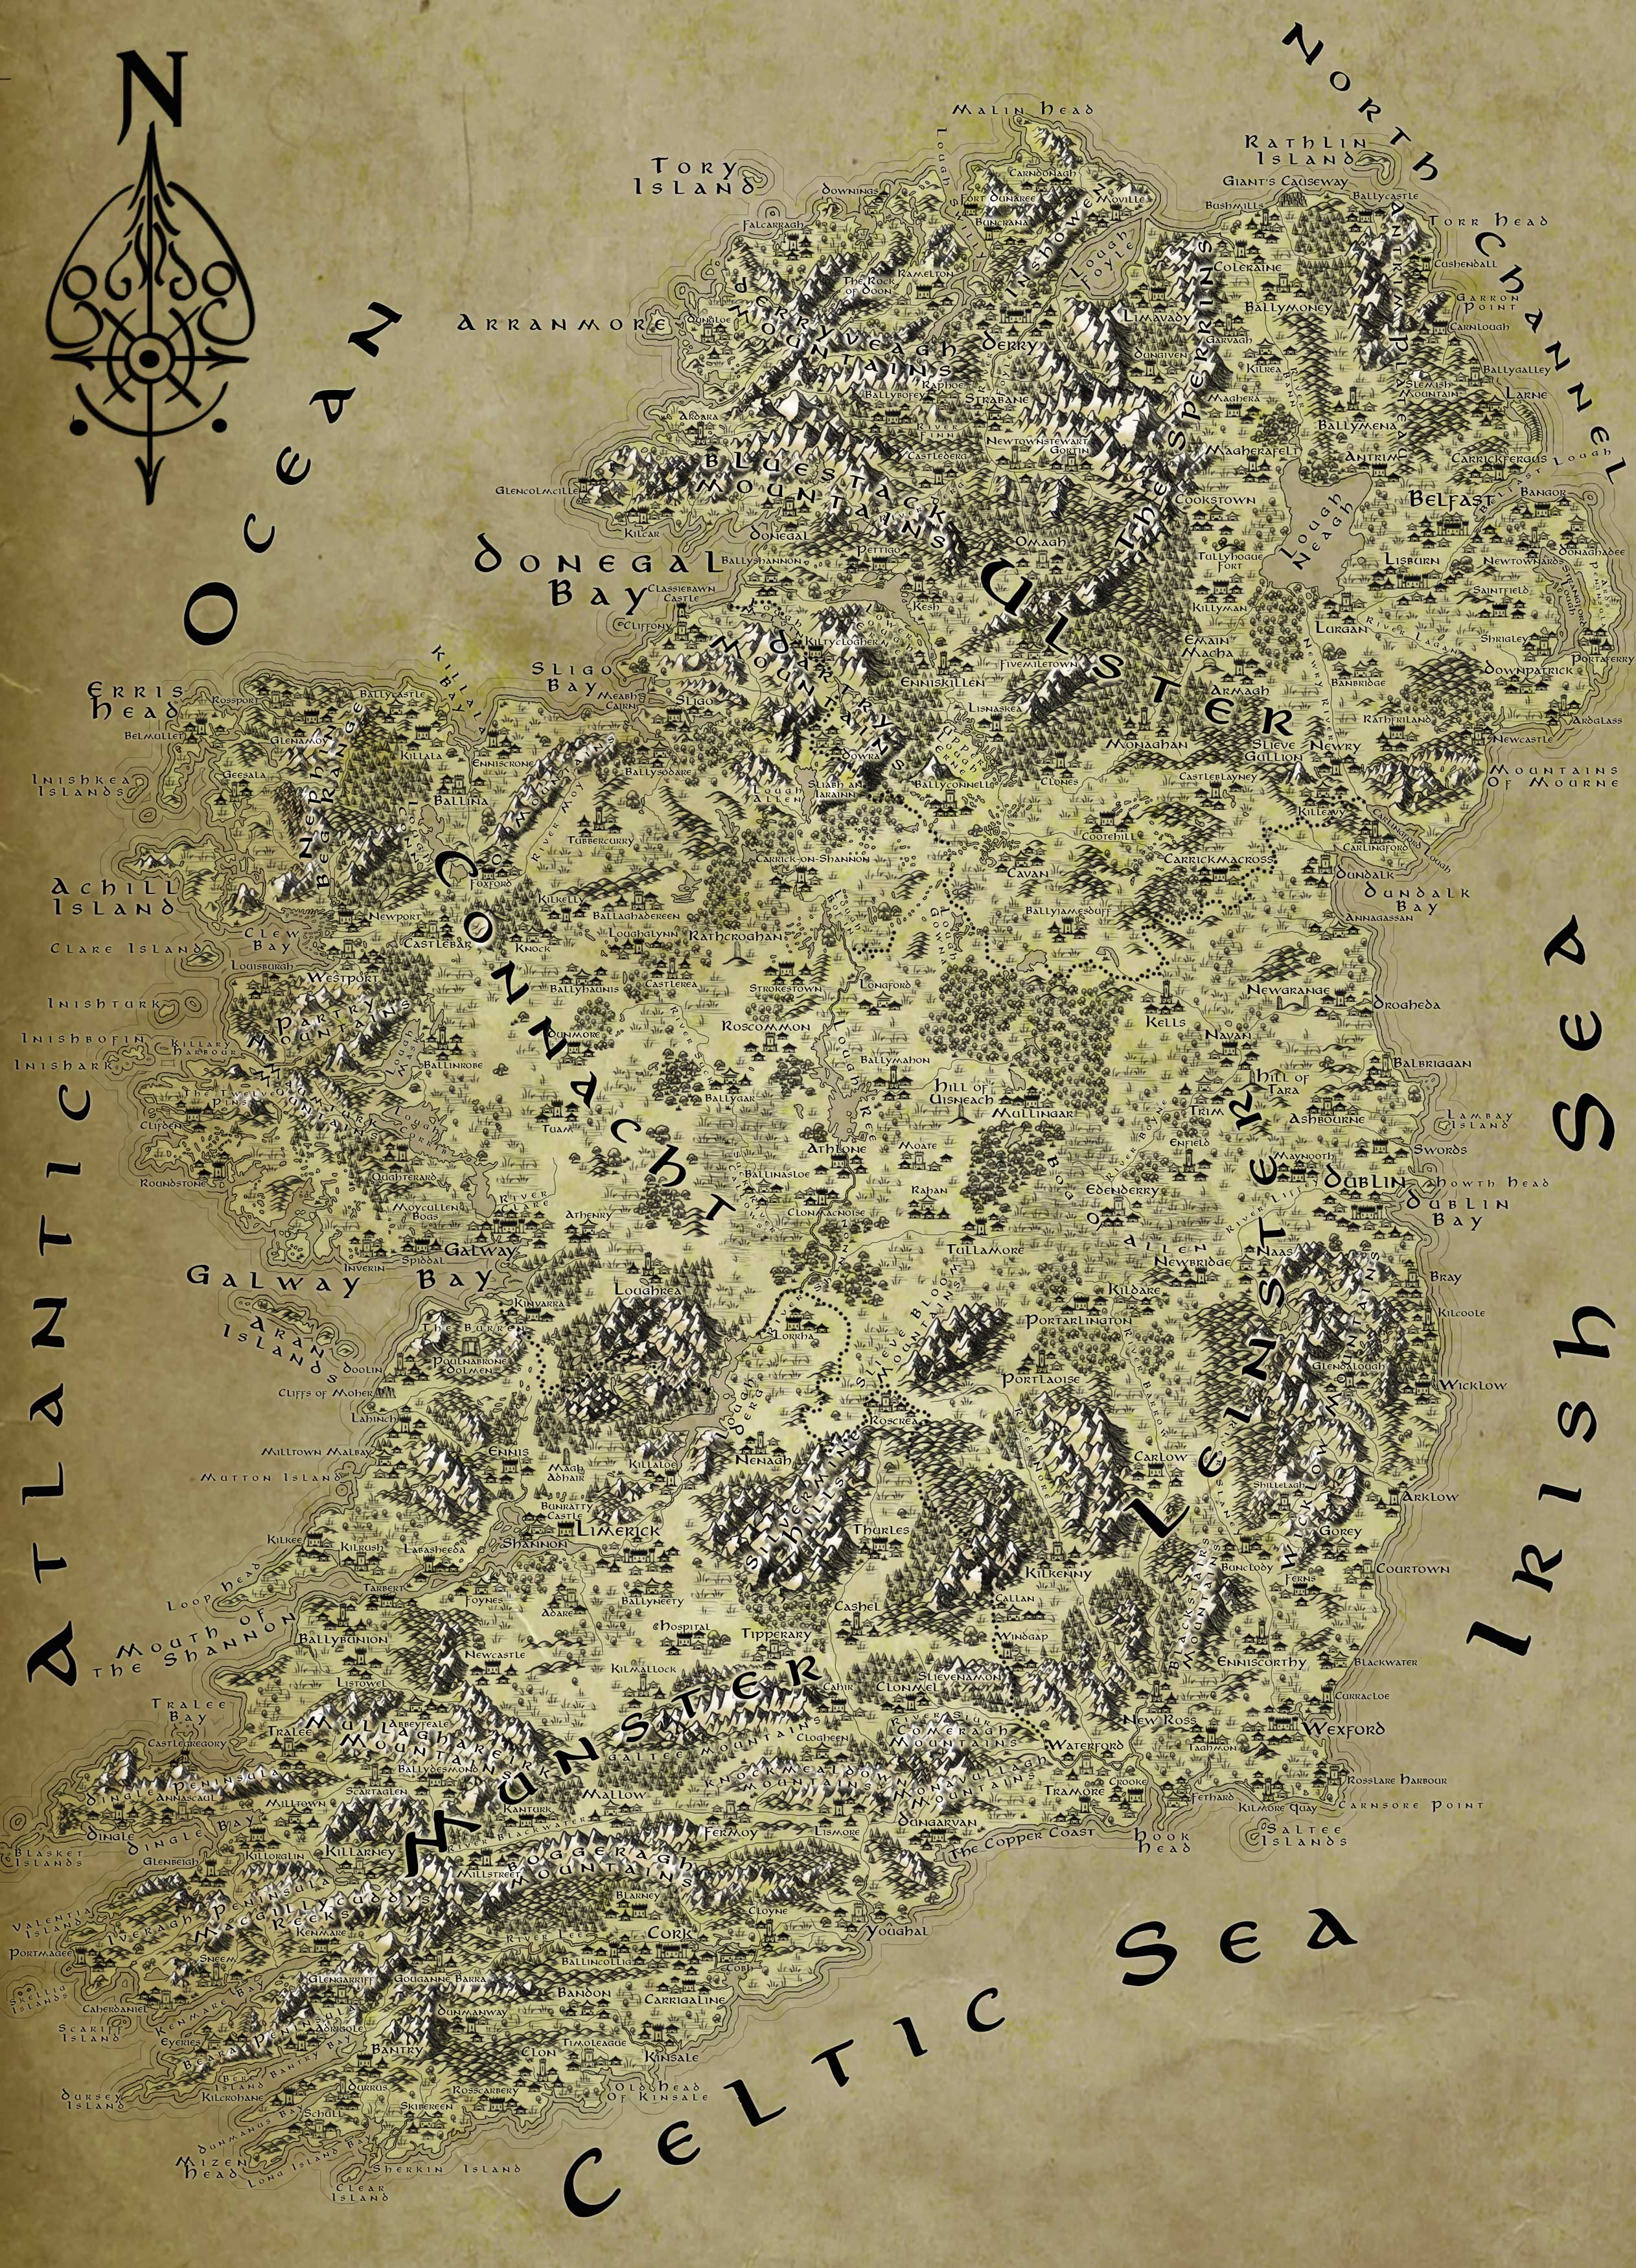 Ireland Fantasy Map Lord of the Rings Tolkien Wallpaper Mural